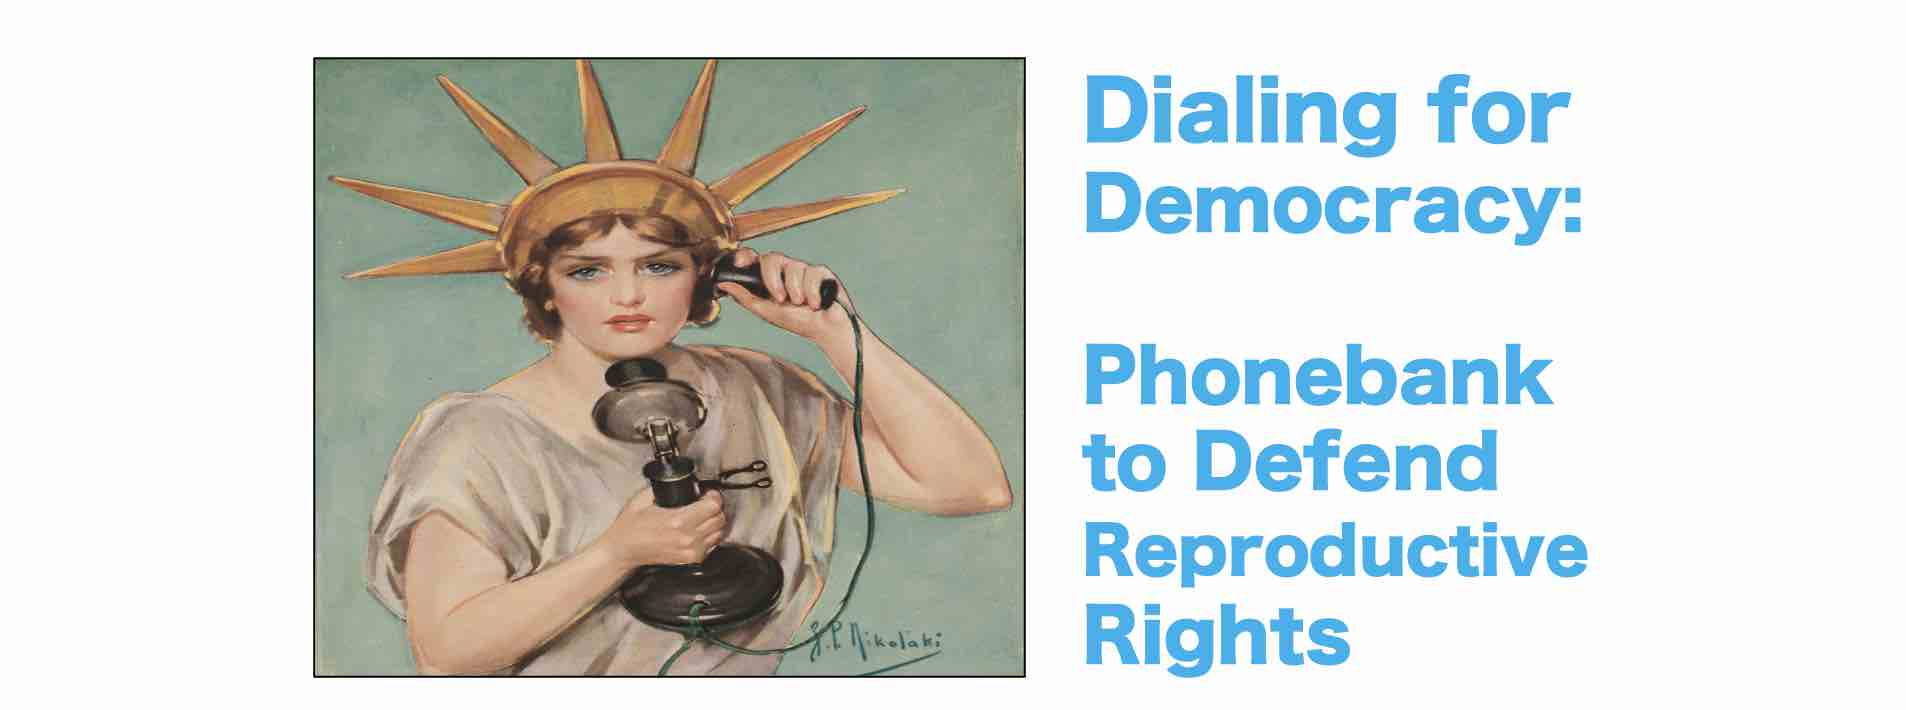 Volunteer to phone bank to protect access to reproductive rights